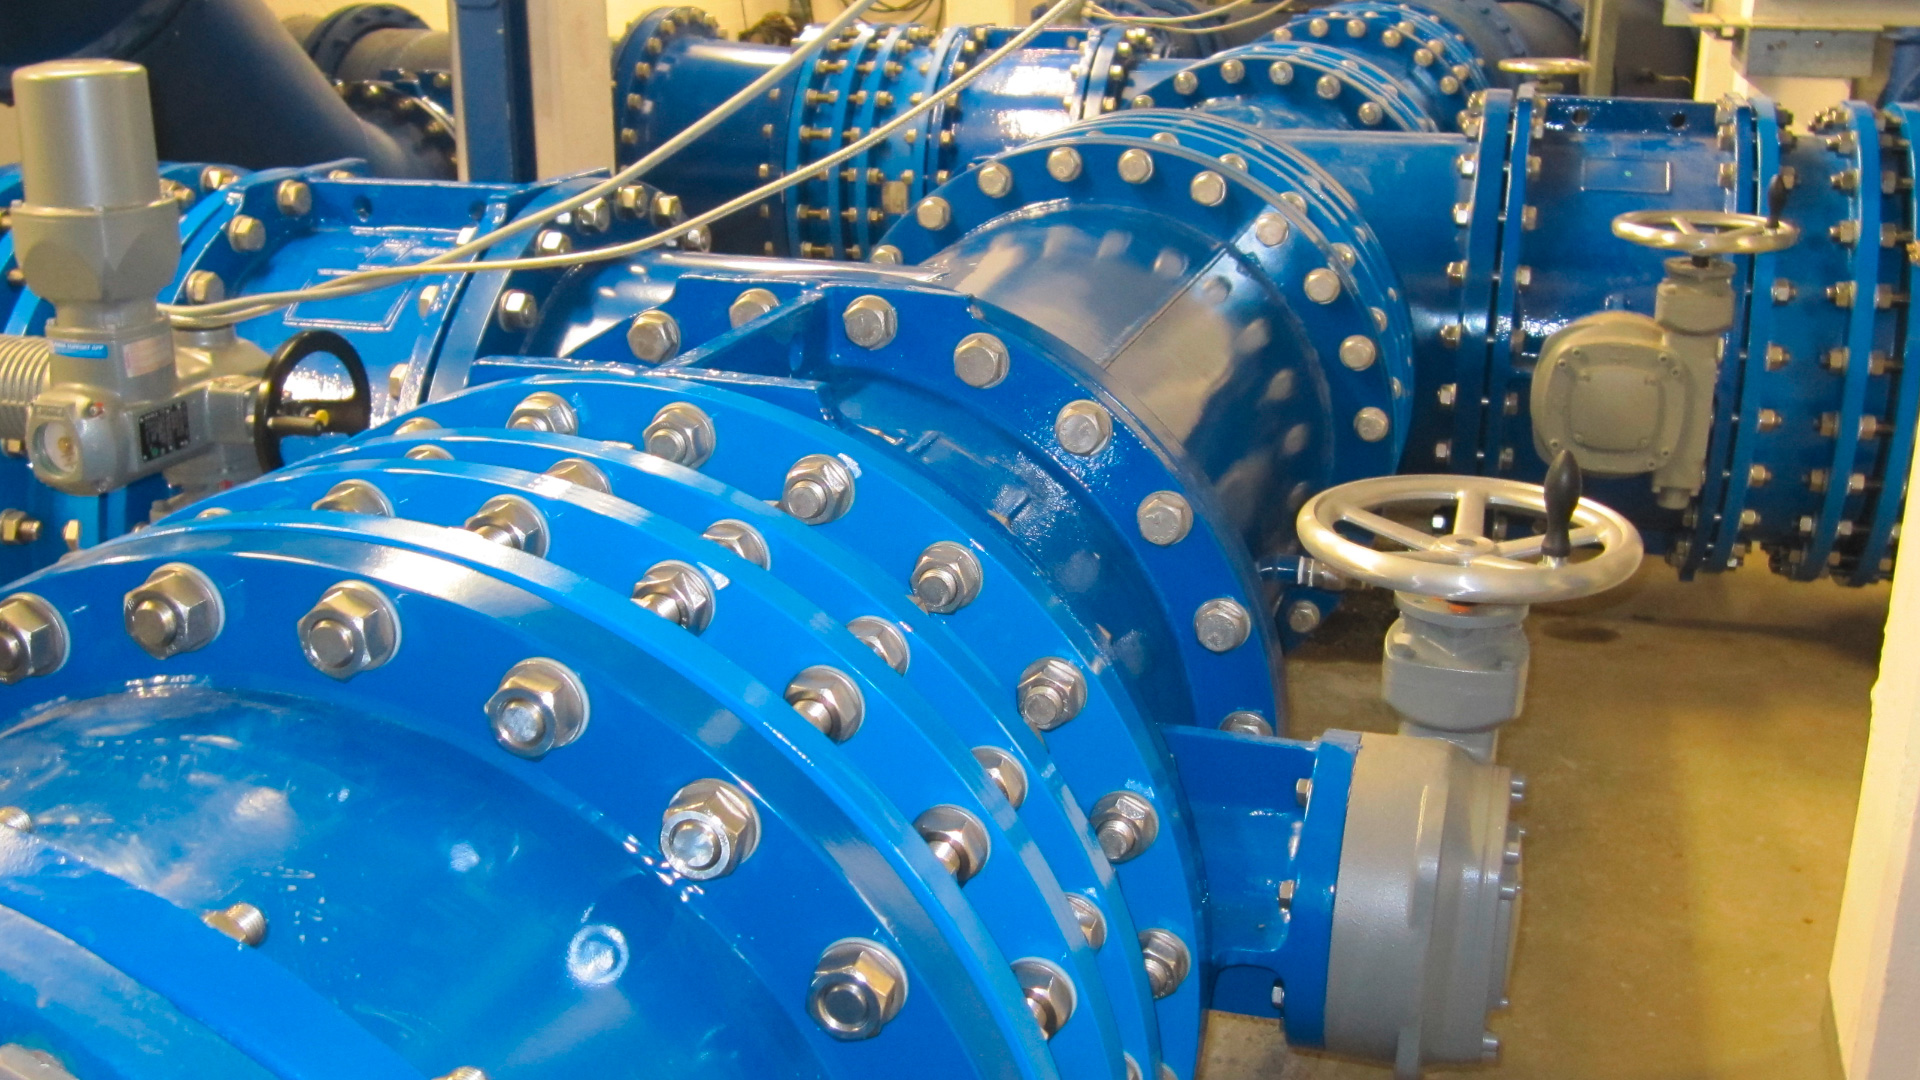 Butterfly valves installed at water treatment plant in Hamburg, Germany